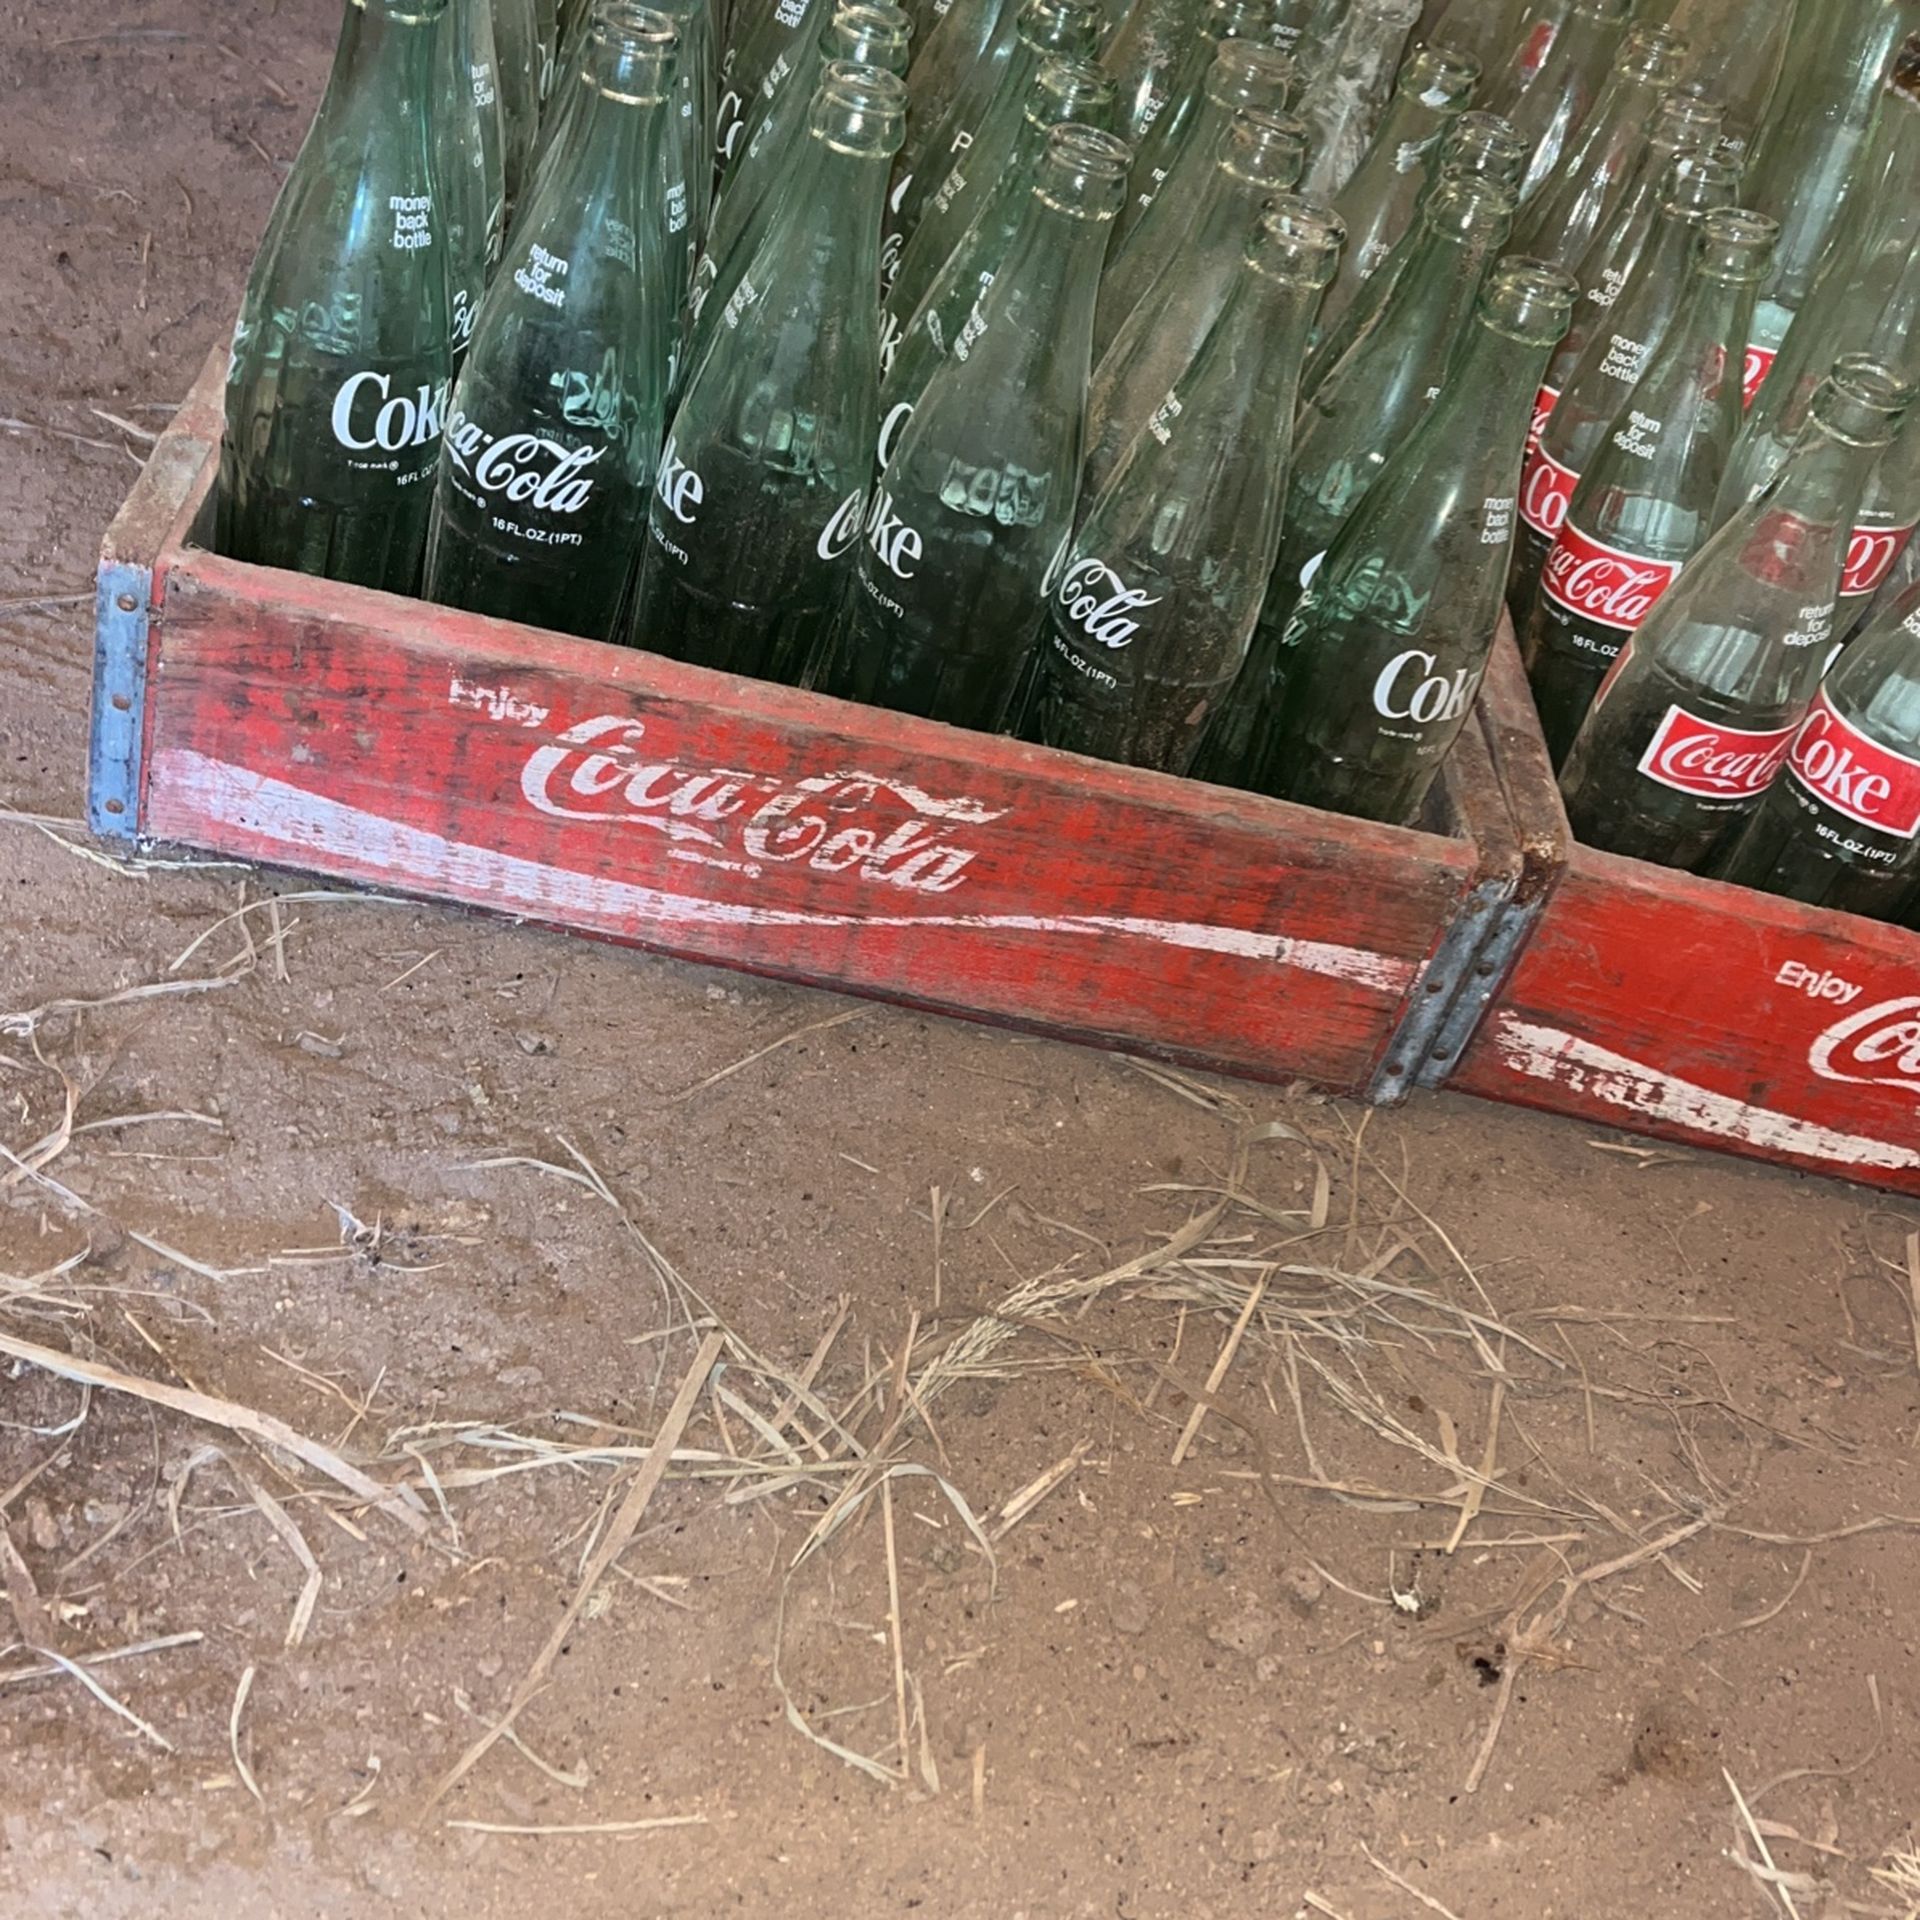 8 Crates One Marked Wood Stock 1978 Bunch Of Bottles Too. 